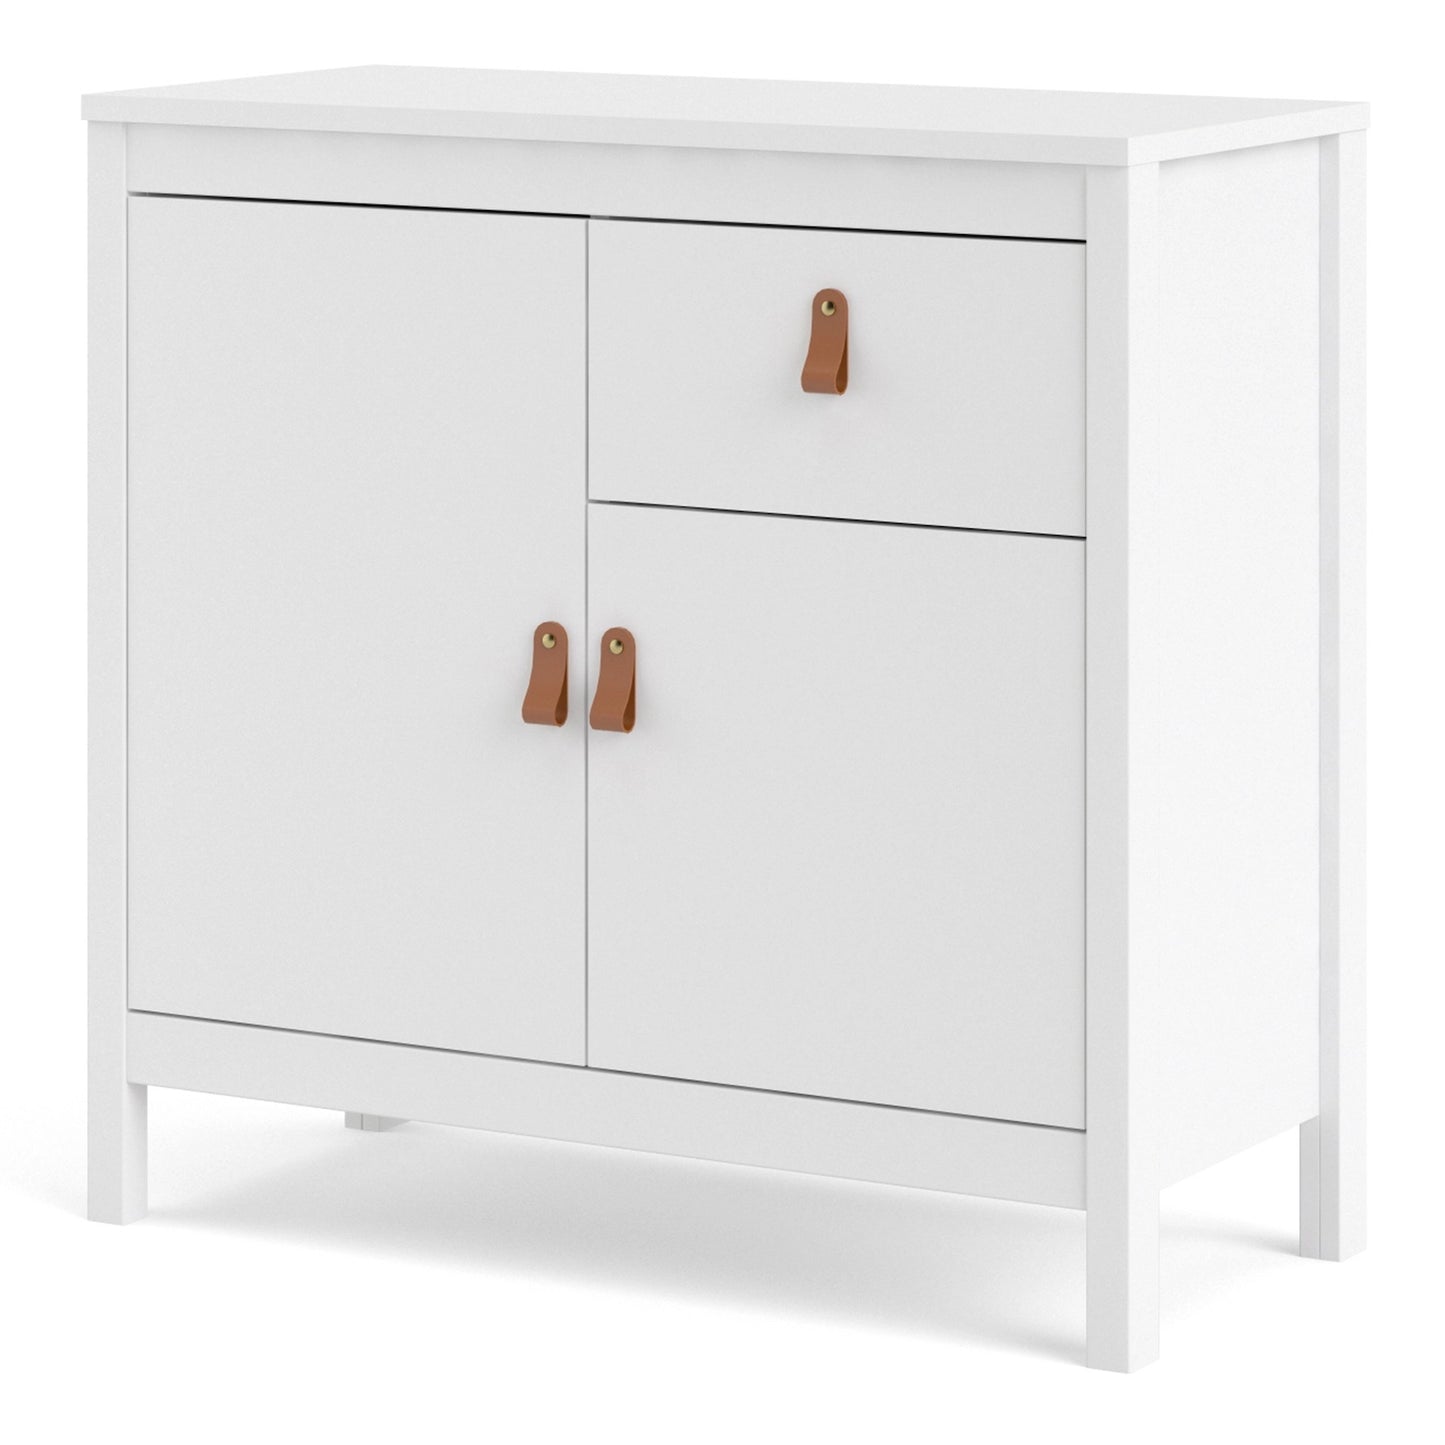 Furniture To Go Barcelona Sideboard 2 Doors + 1 Drawer in White